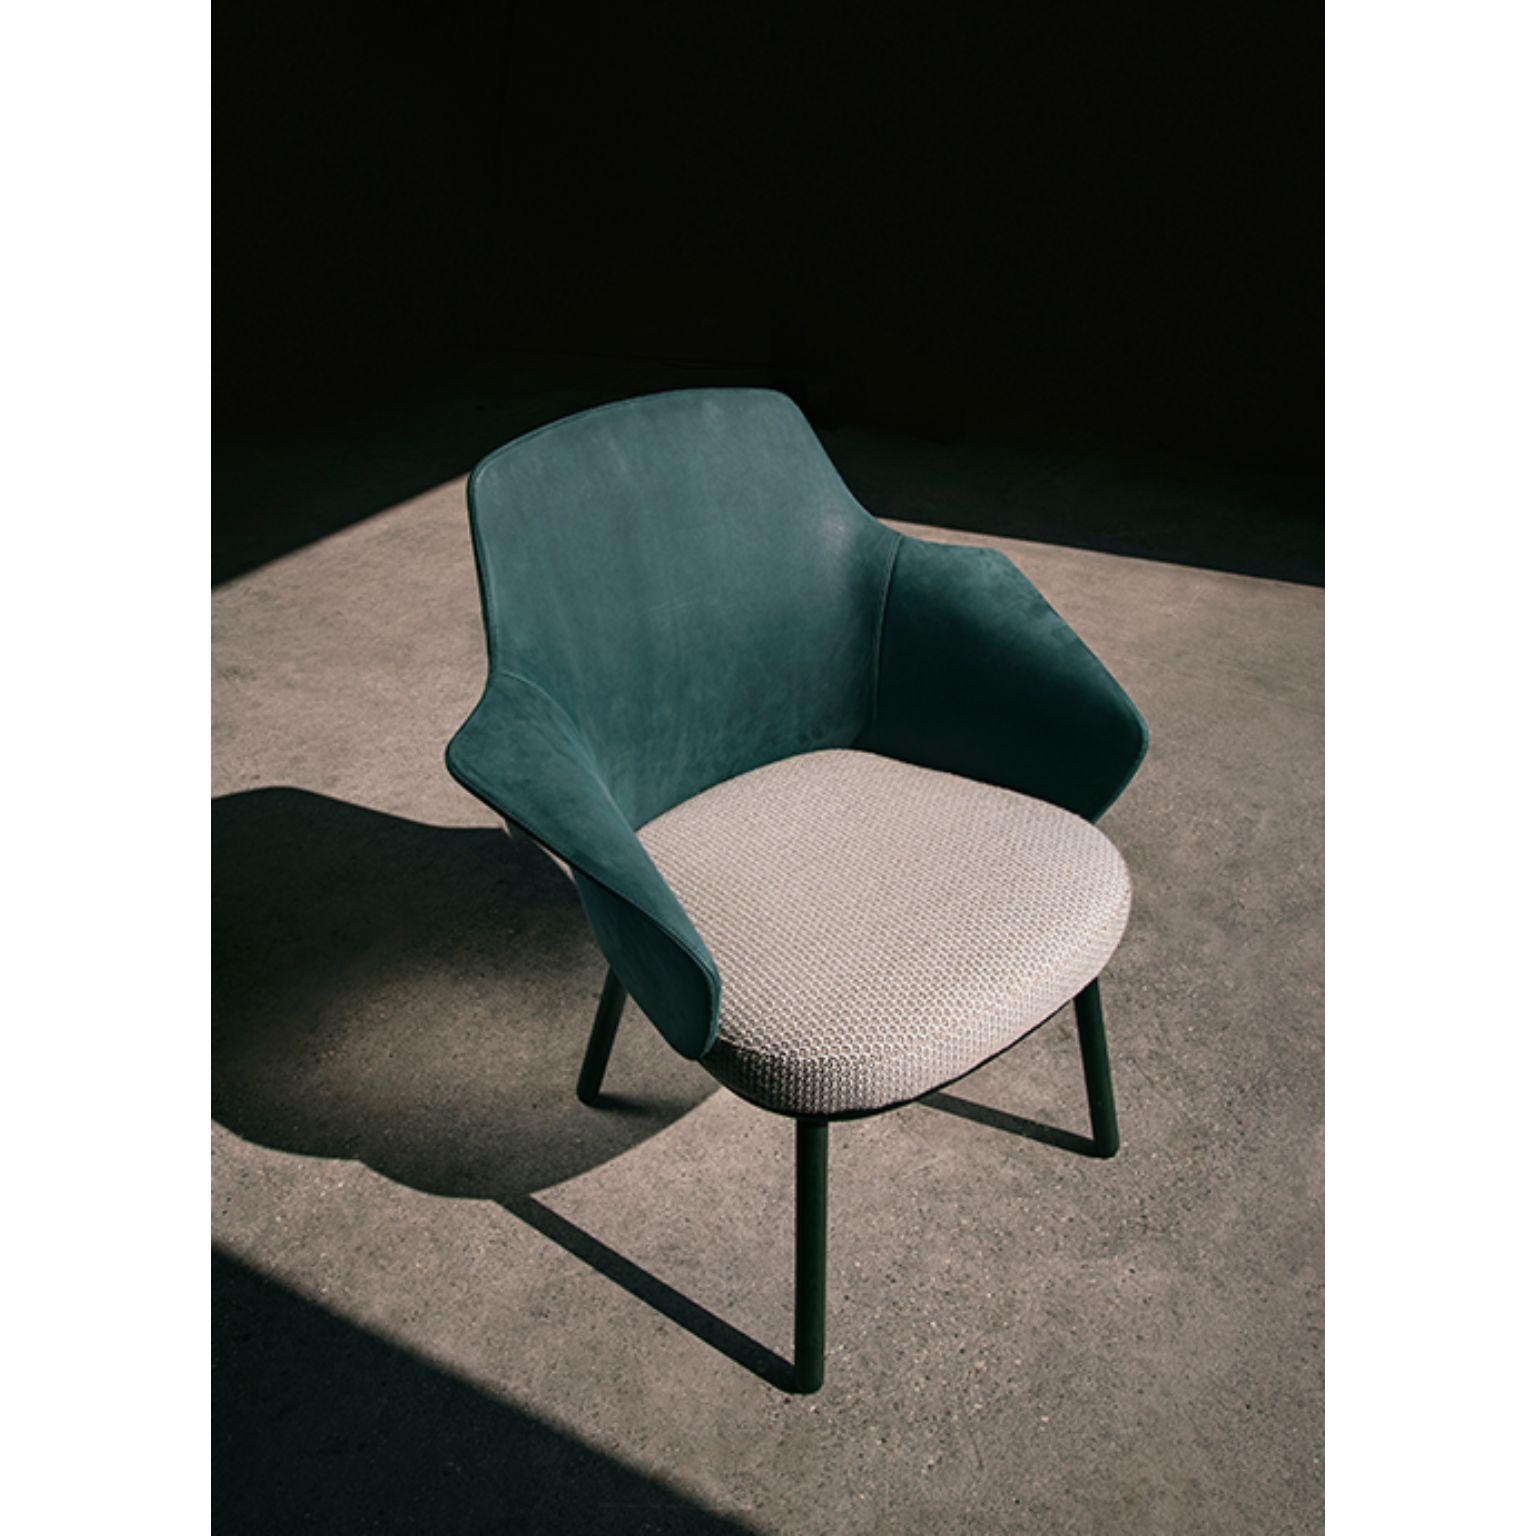 Linus armchair by Marco Dessí
Materials: Upholstery: Fabric (also available in leather please contact us)
Structure: Wood: Noce Canaletto solid wood, Coral/Dark green/Black stained wood
 Also available metal: Black powder-coated metal, black